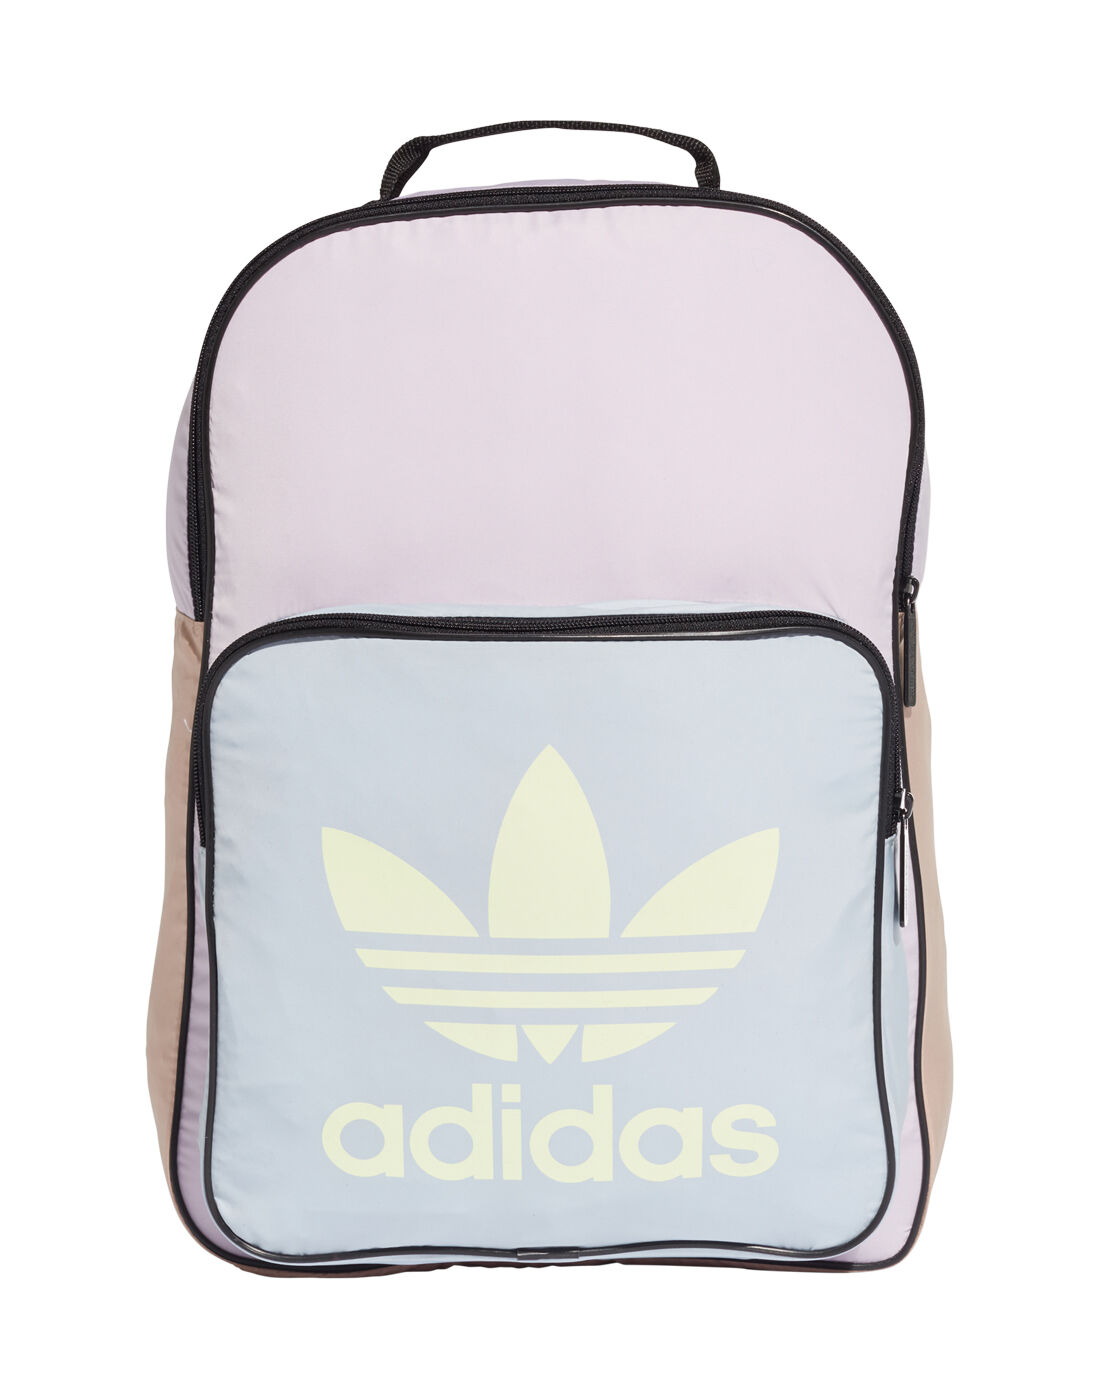 adidas classic trefoil backpack pink